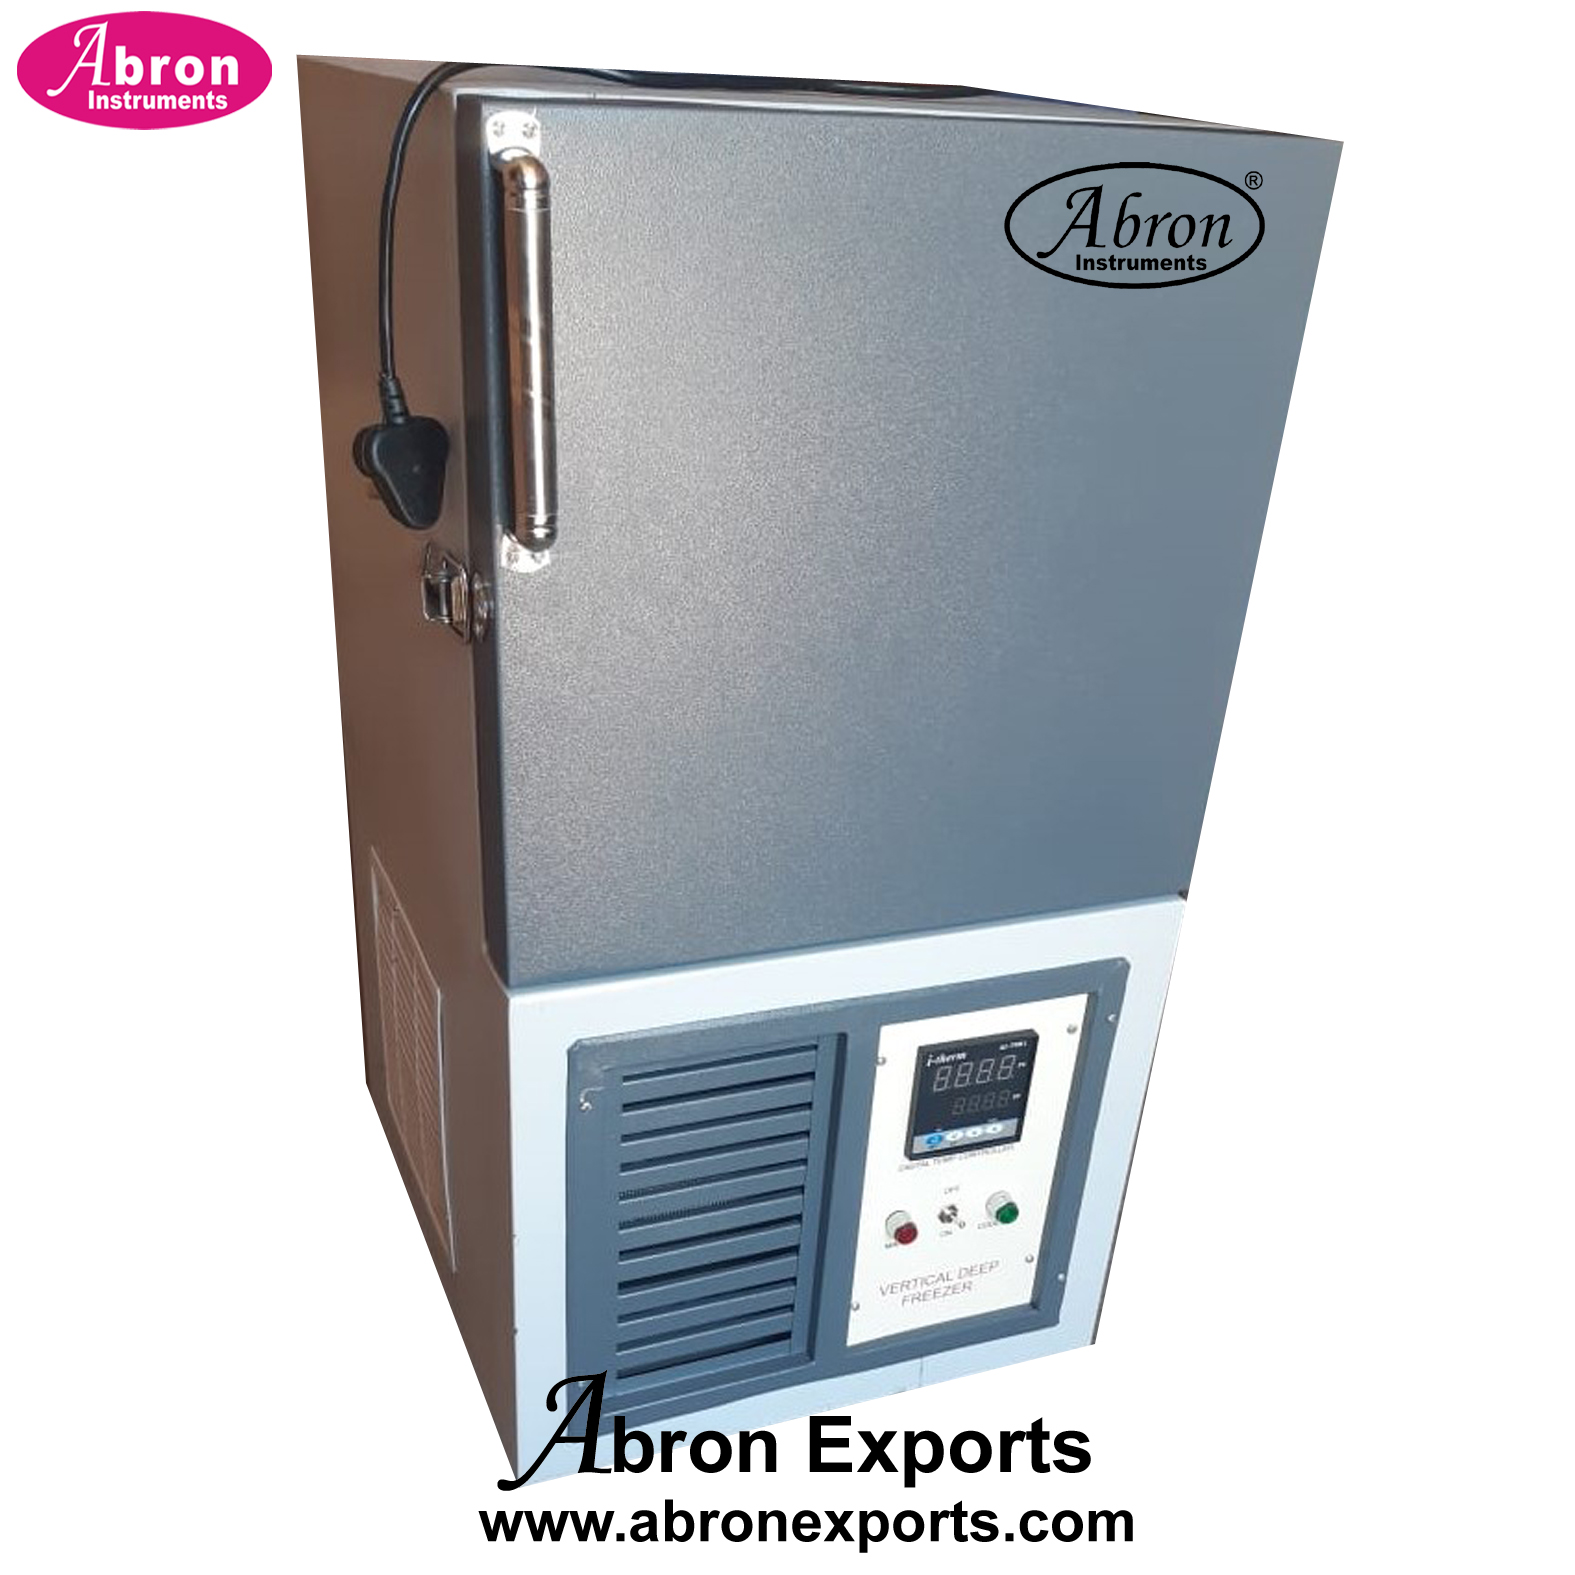 ultra low deep freezer Oven digital -40C temperature cooling ss chamber trays Abron ABM-2691U40 